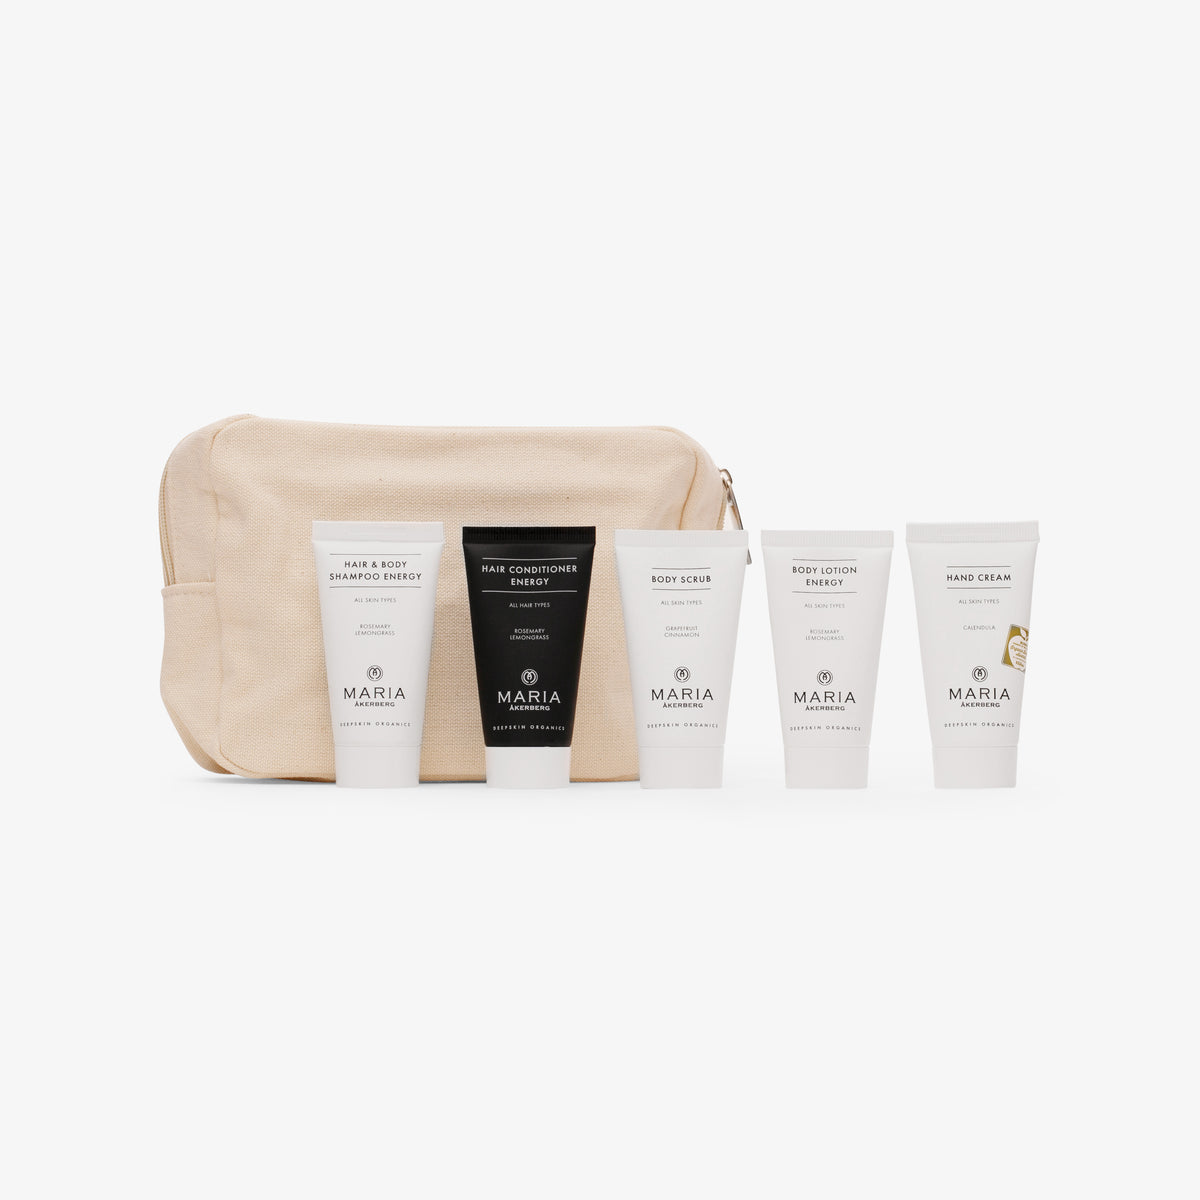 Hair & Body Travel / Discovery Kit